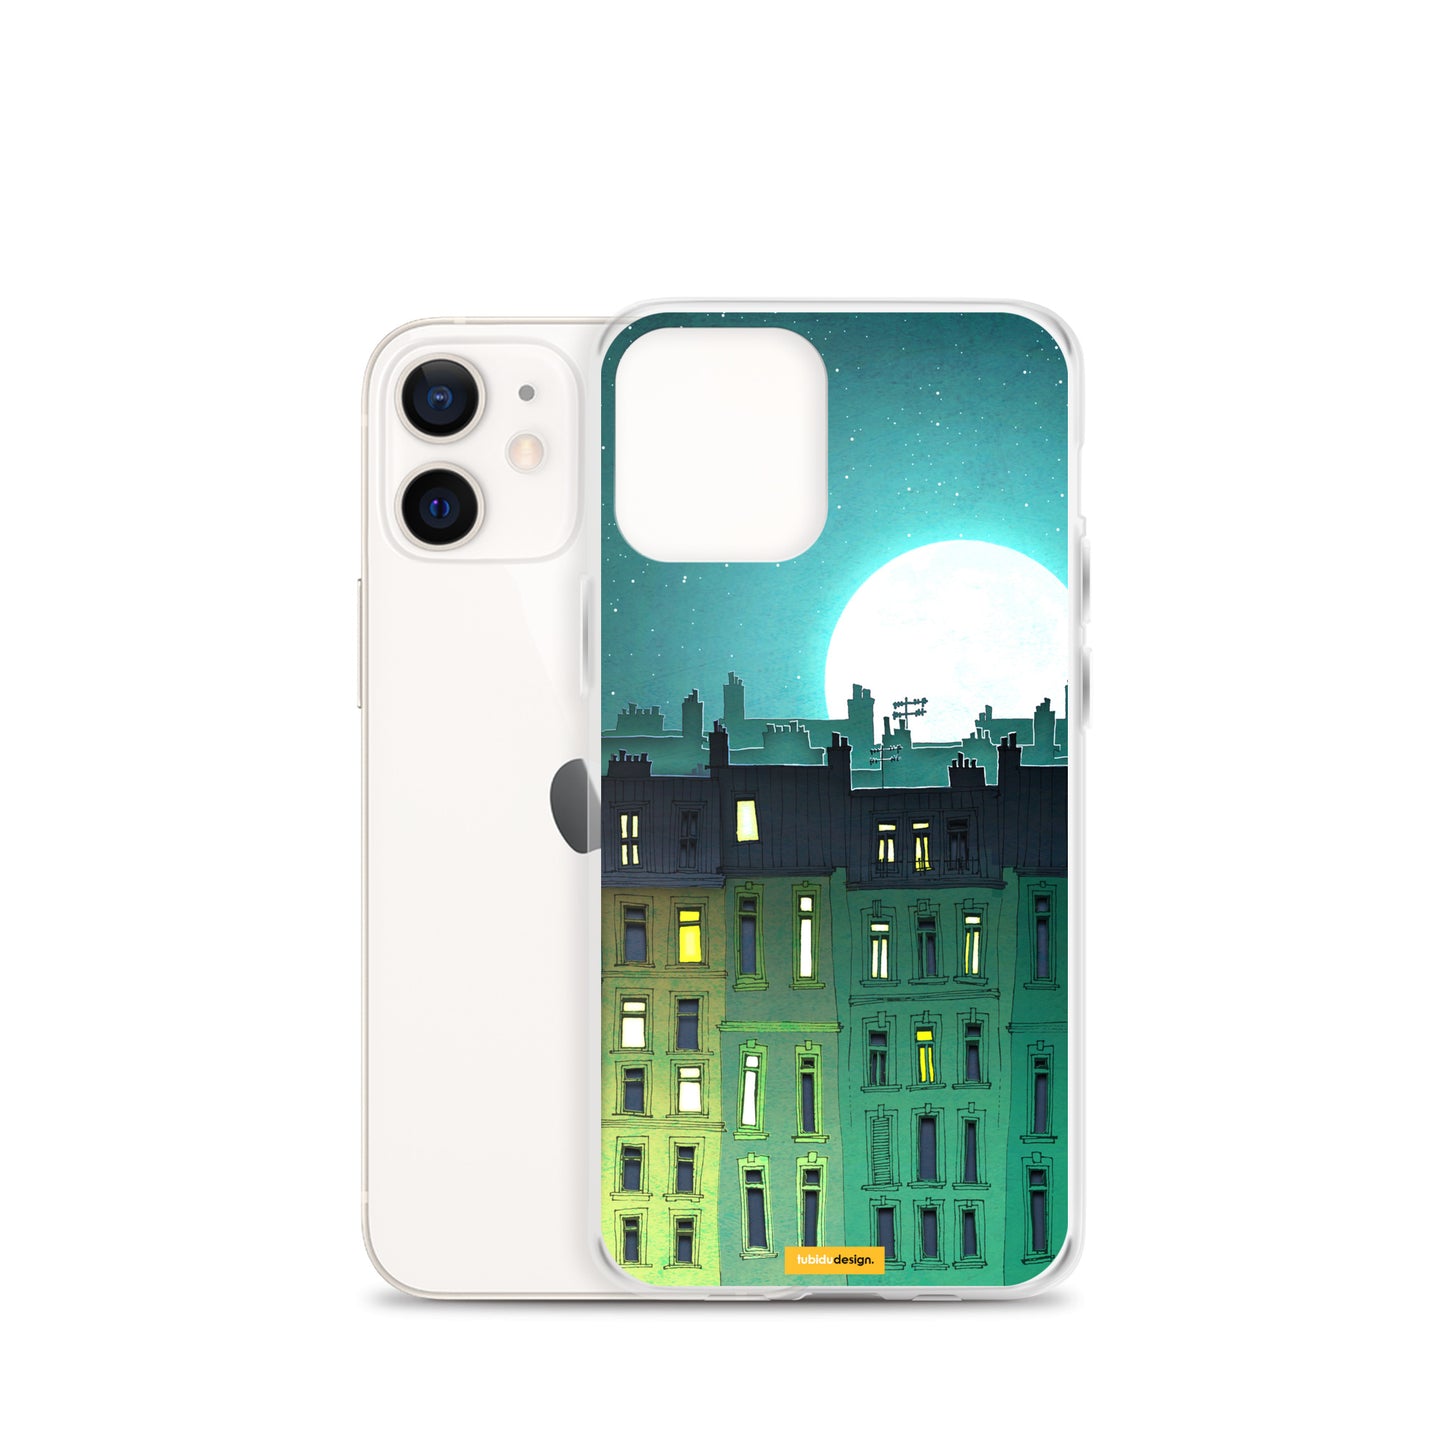 Song to the Moon - Illustrated iPhone Case